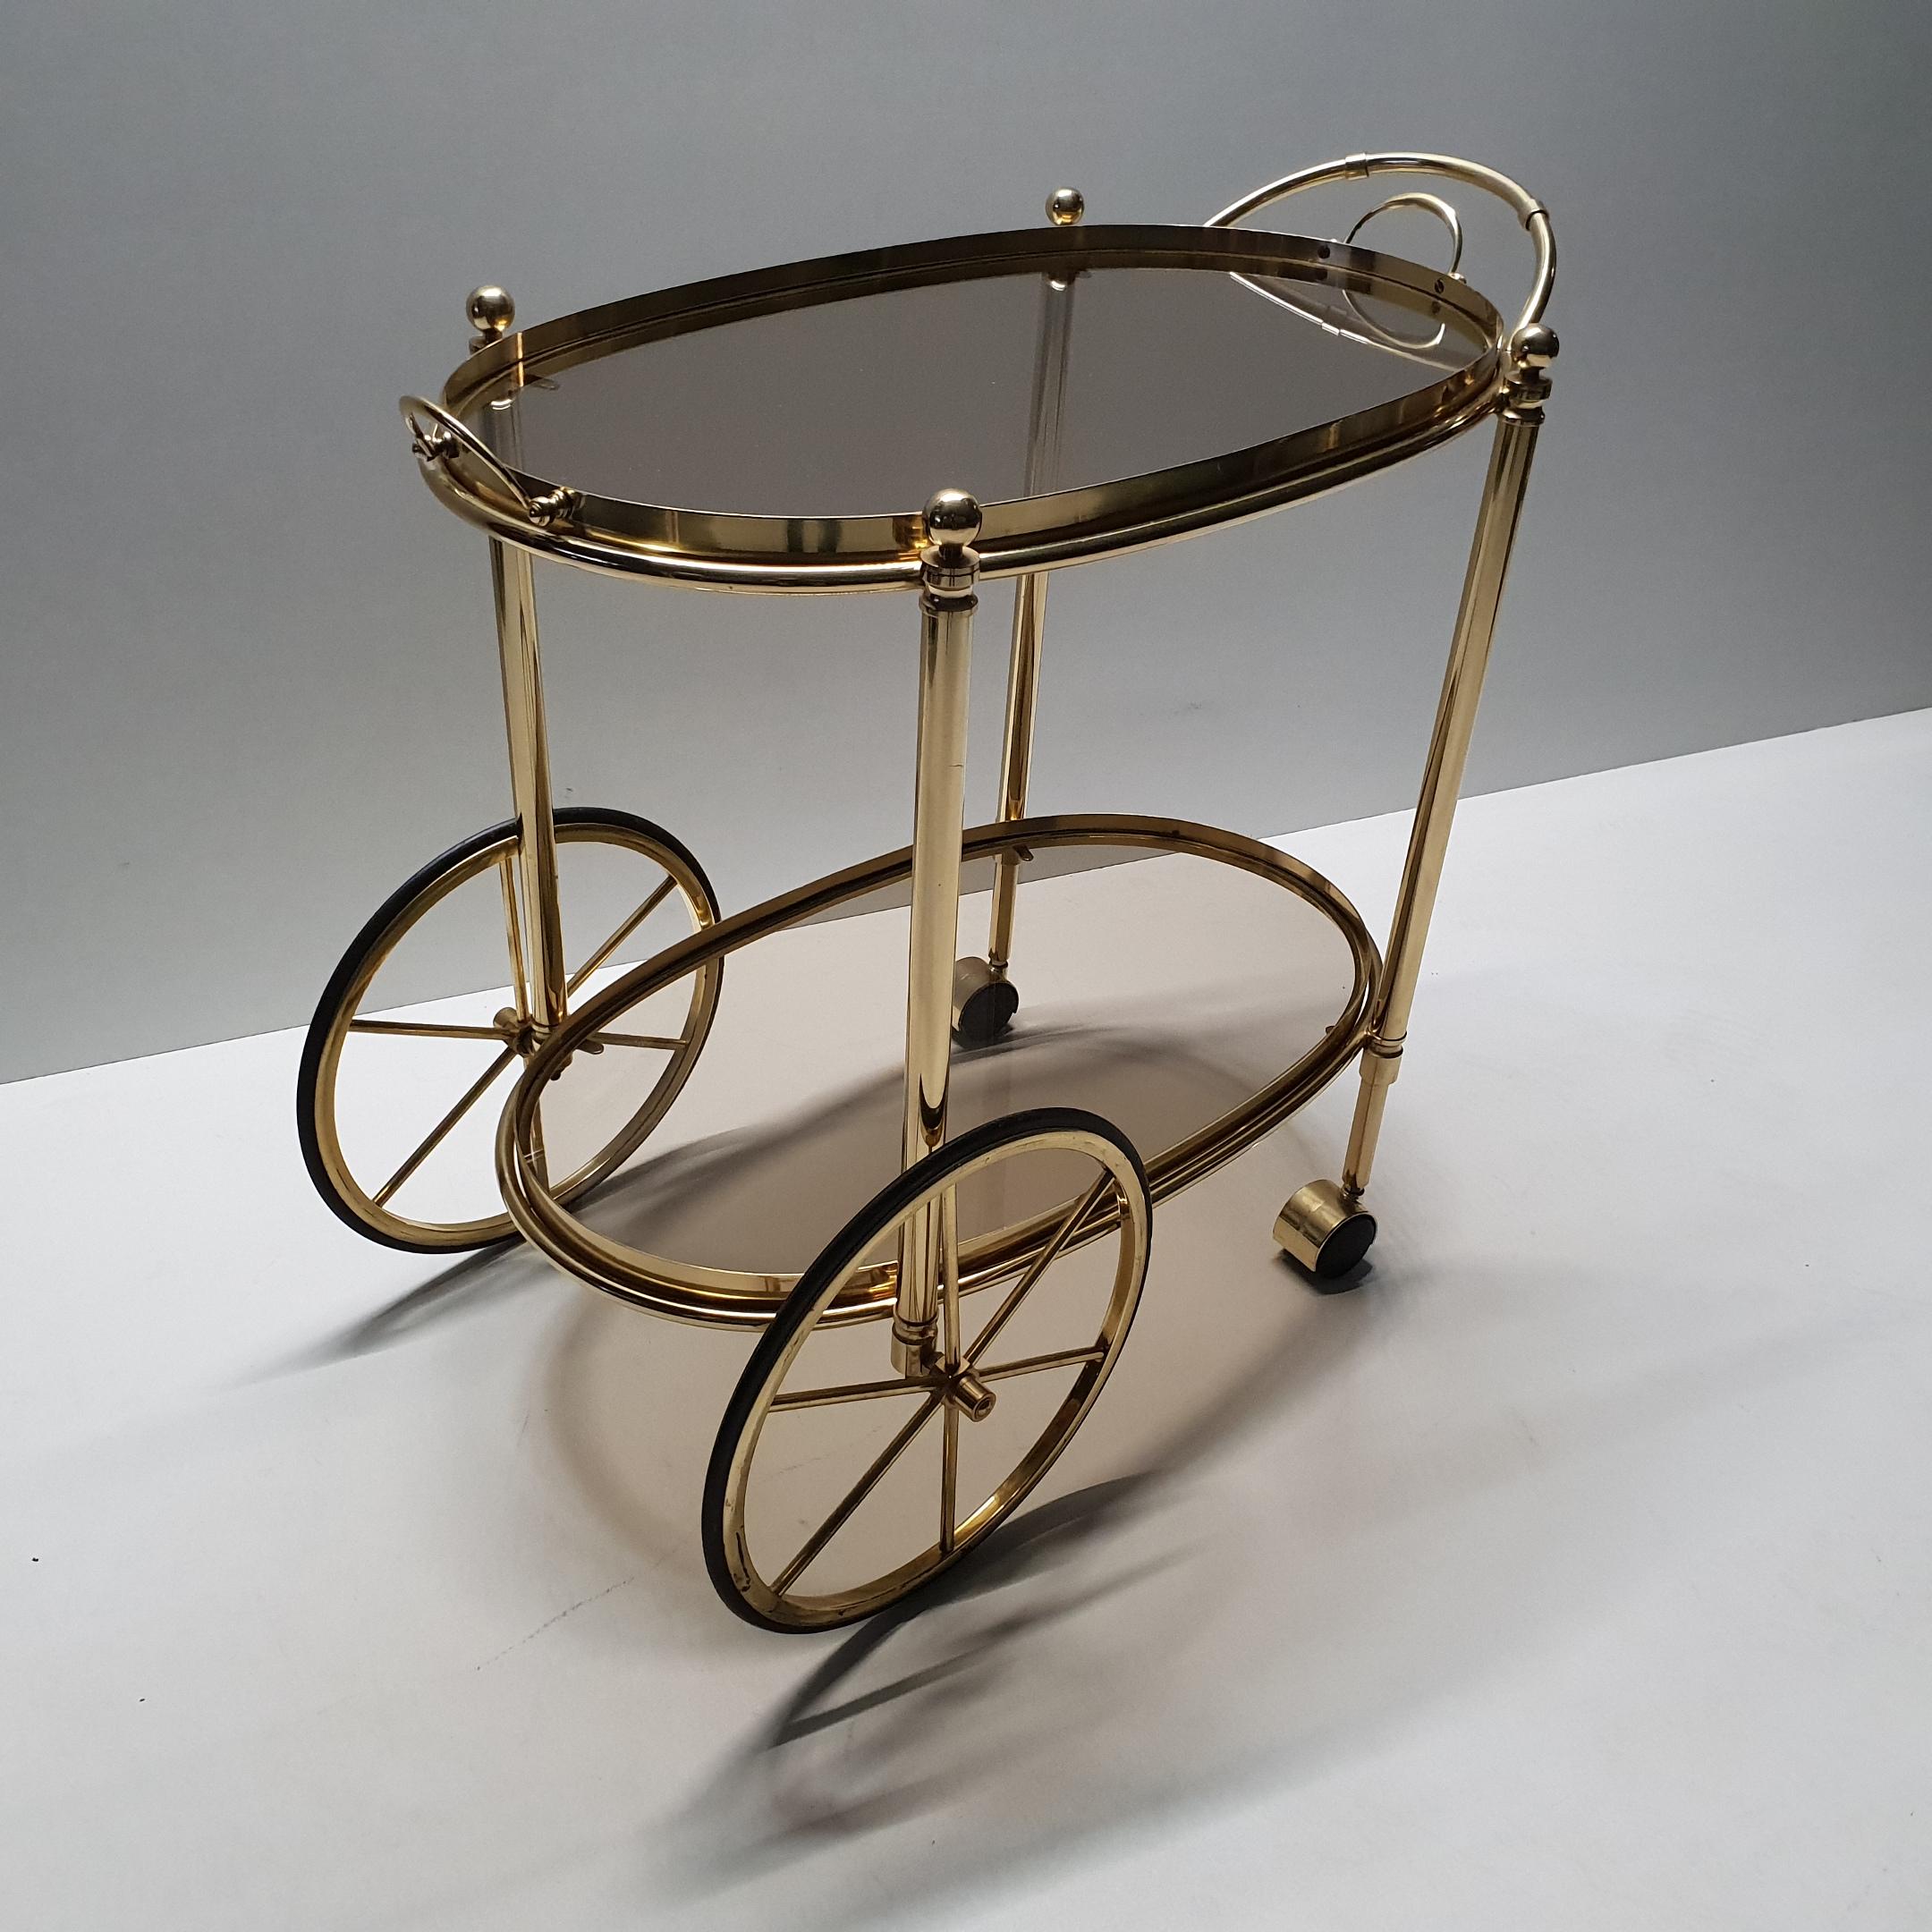 High Quality Italian Brass Trolley Bar Cart with Smoked Glass, 1980s For Sale 5